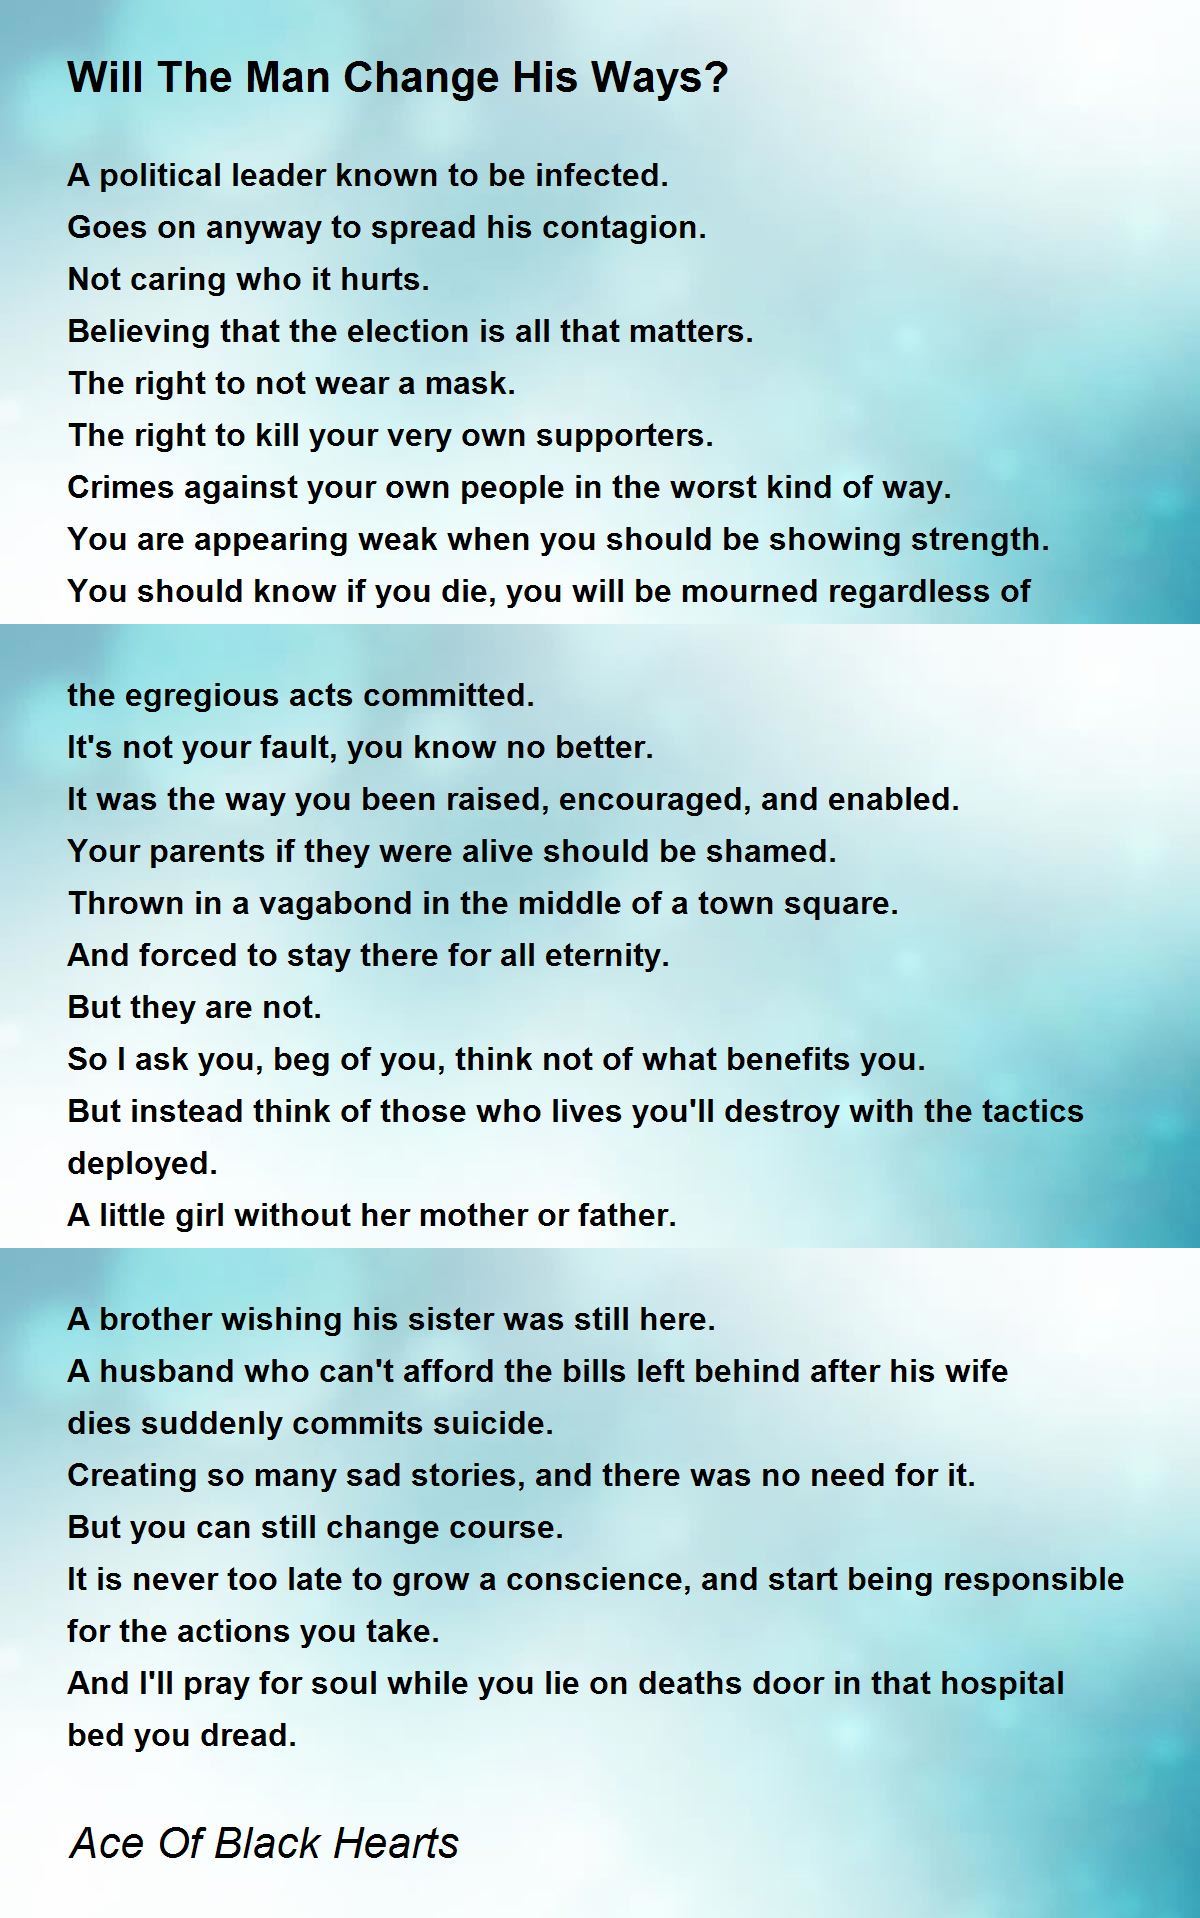 Will The Man Change His Ways? Poem by Ace Of Black Hearts - Poem Hunter